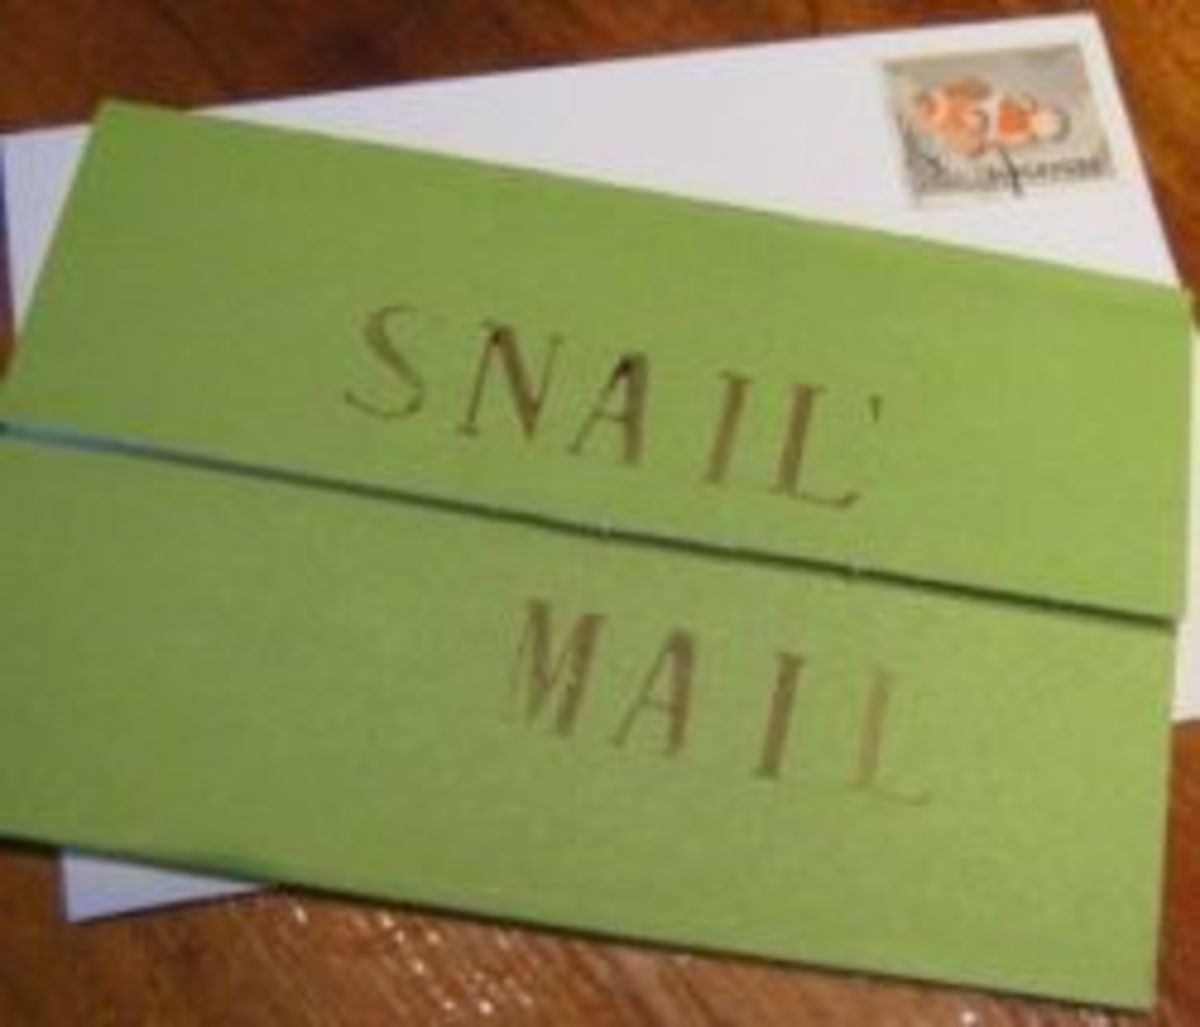 New Technology and the Power of Snail Mail